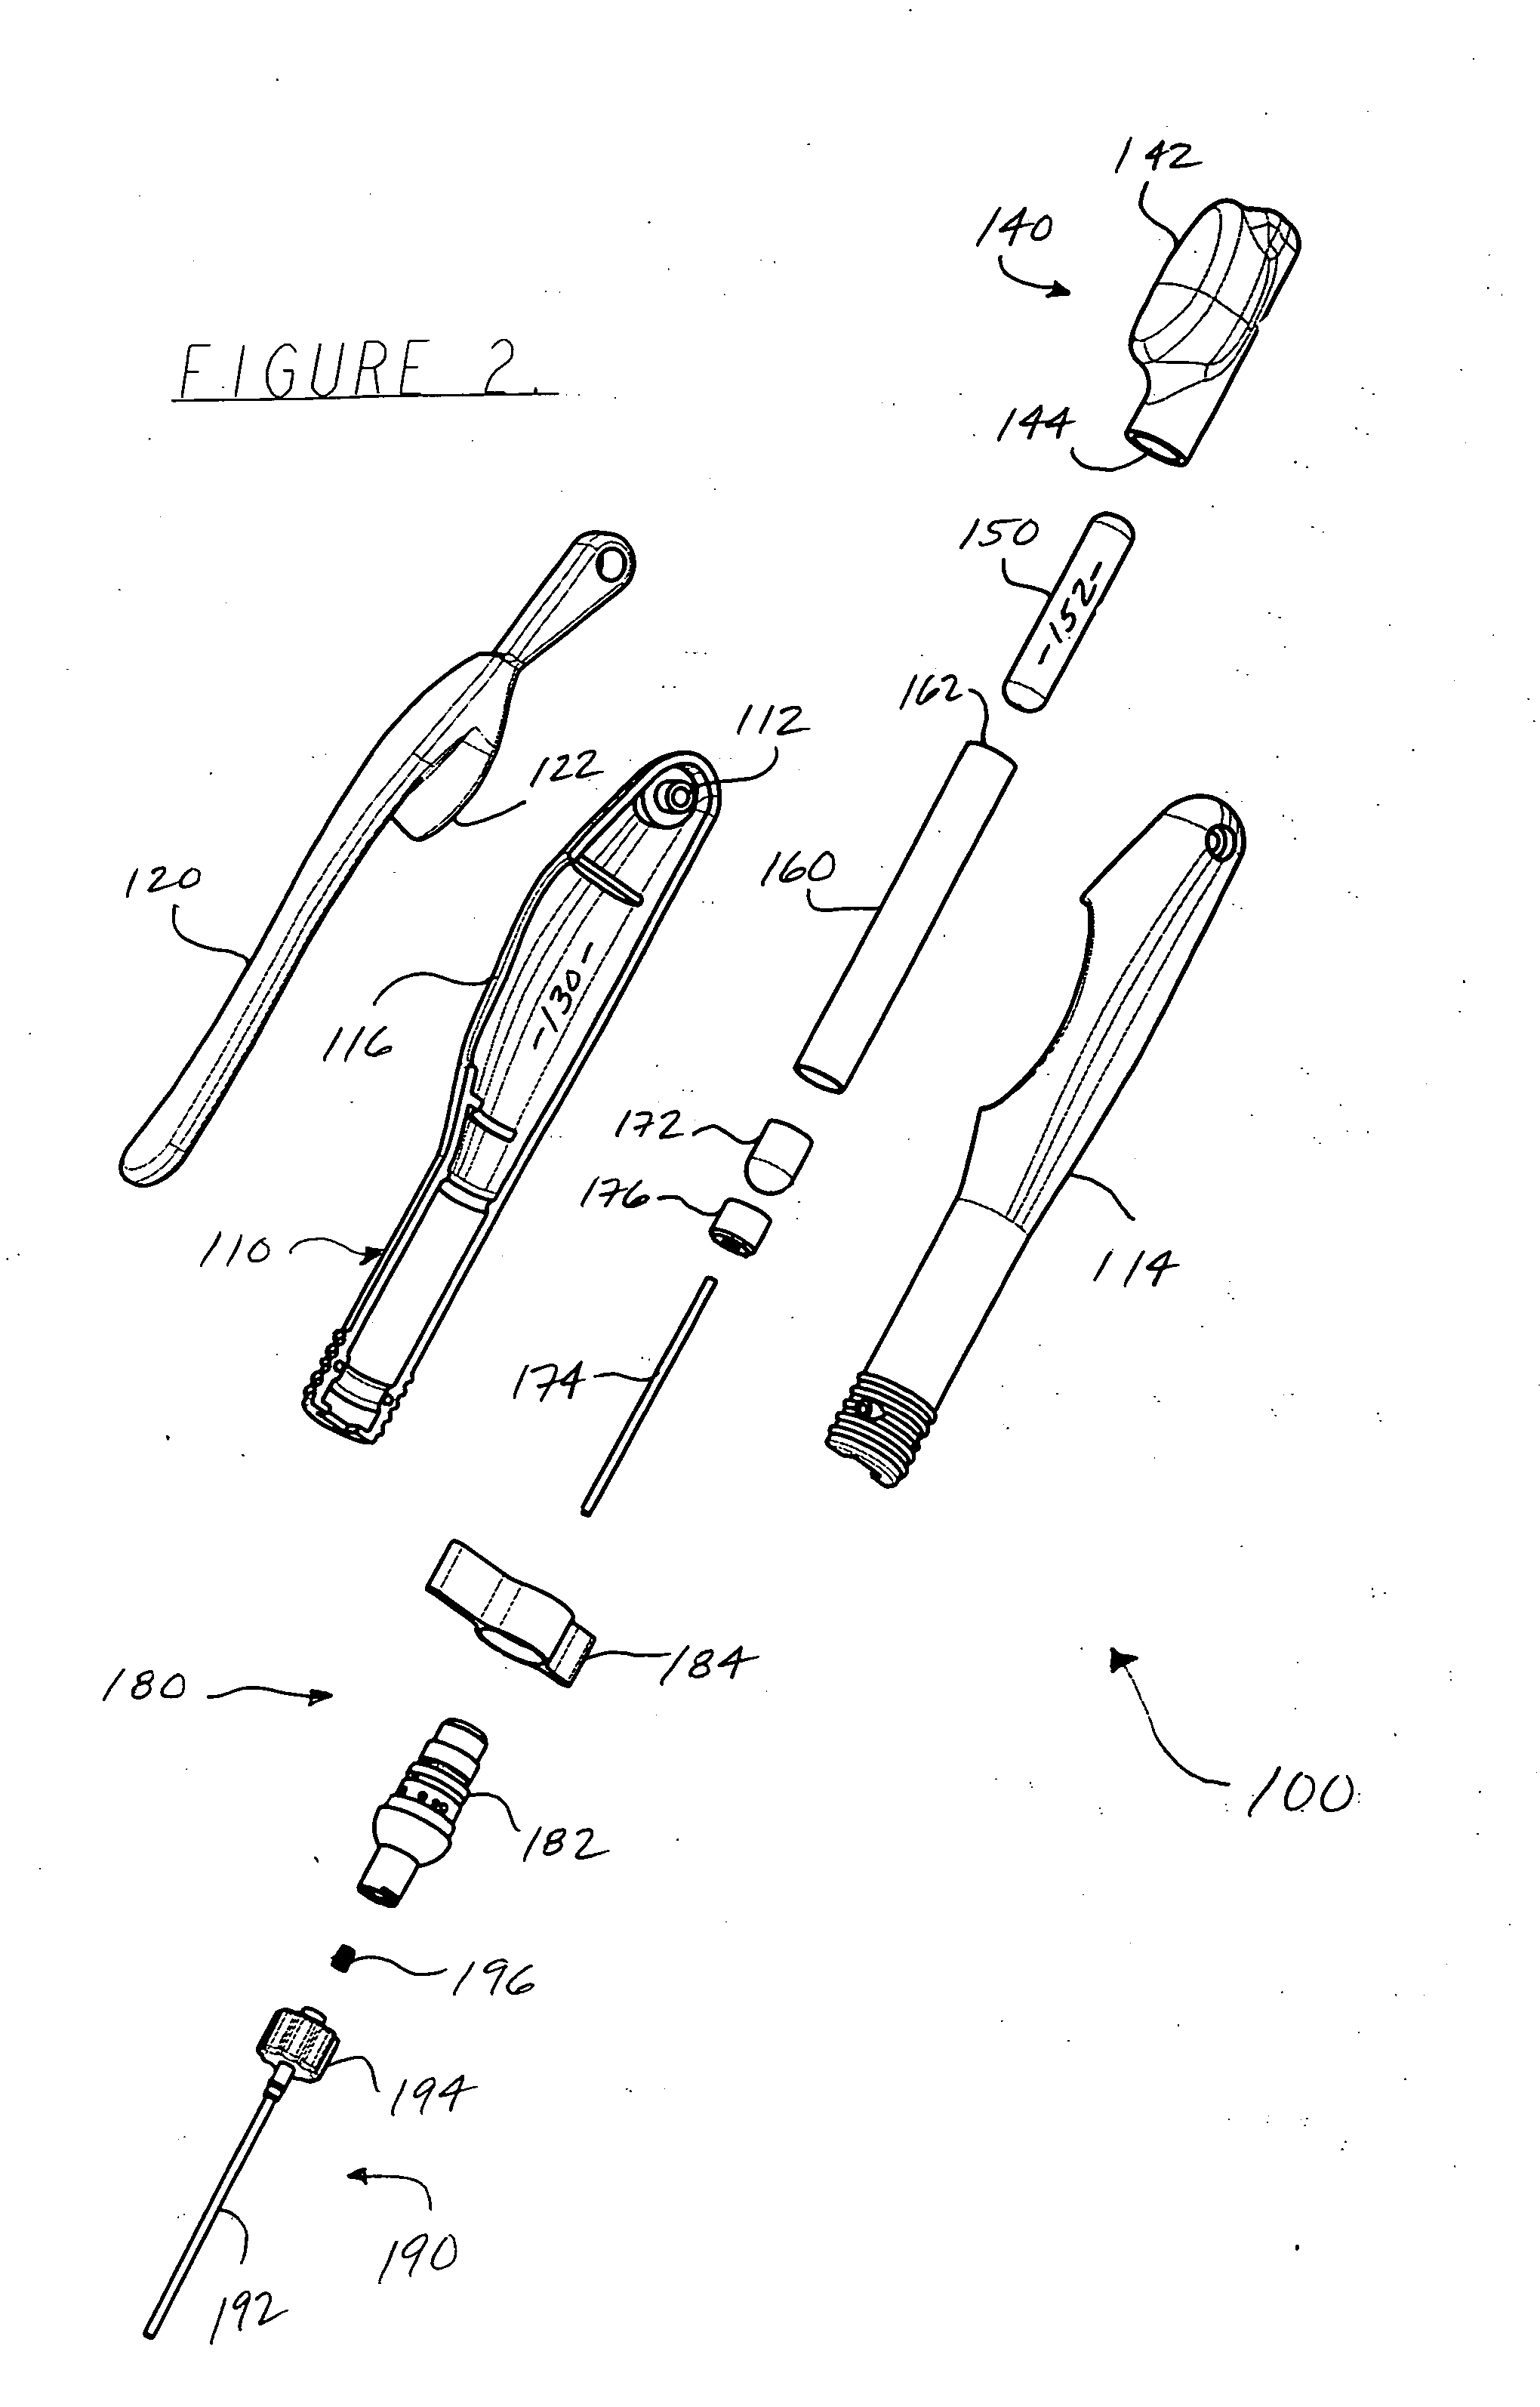 Applicators, dispensers and methods for mixing, dispensing and applying adhesive or sealant material and another material